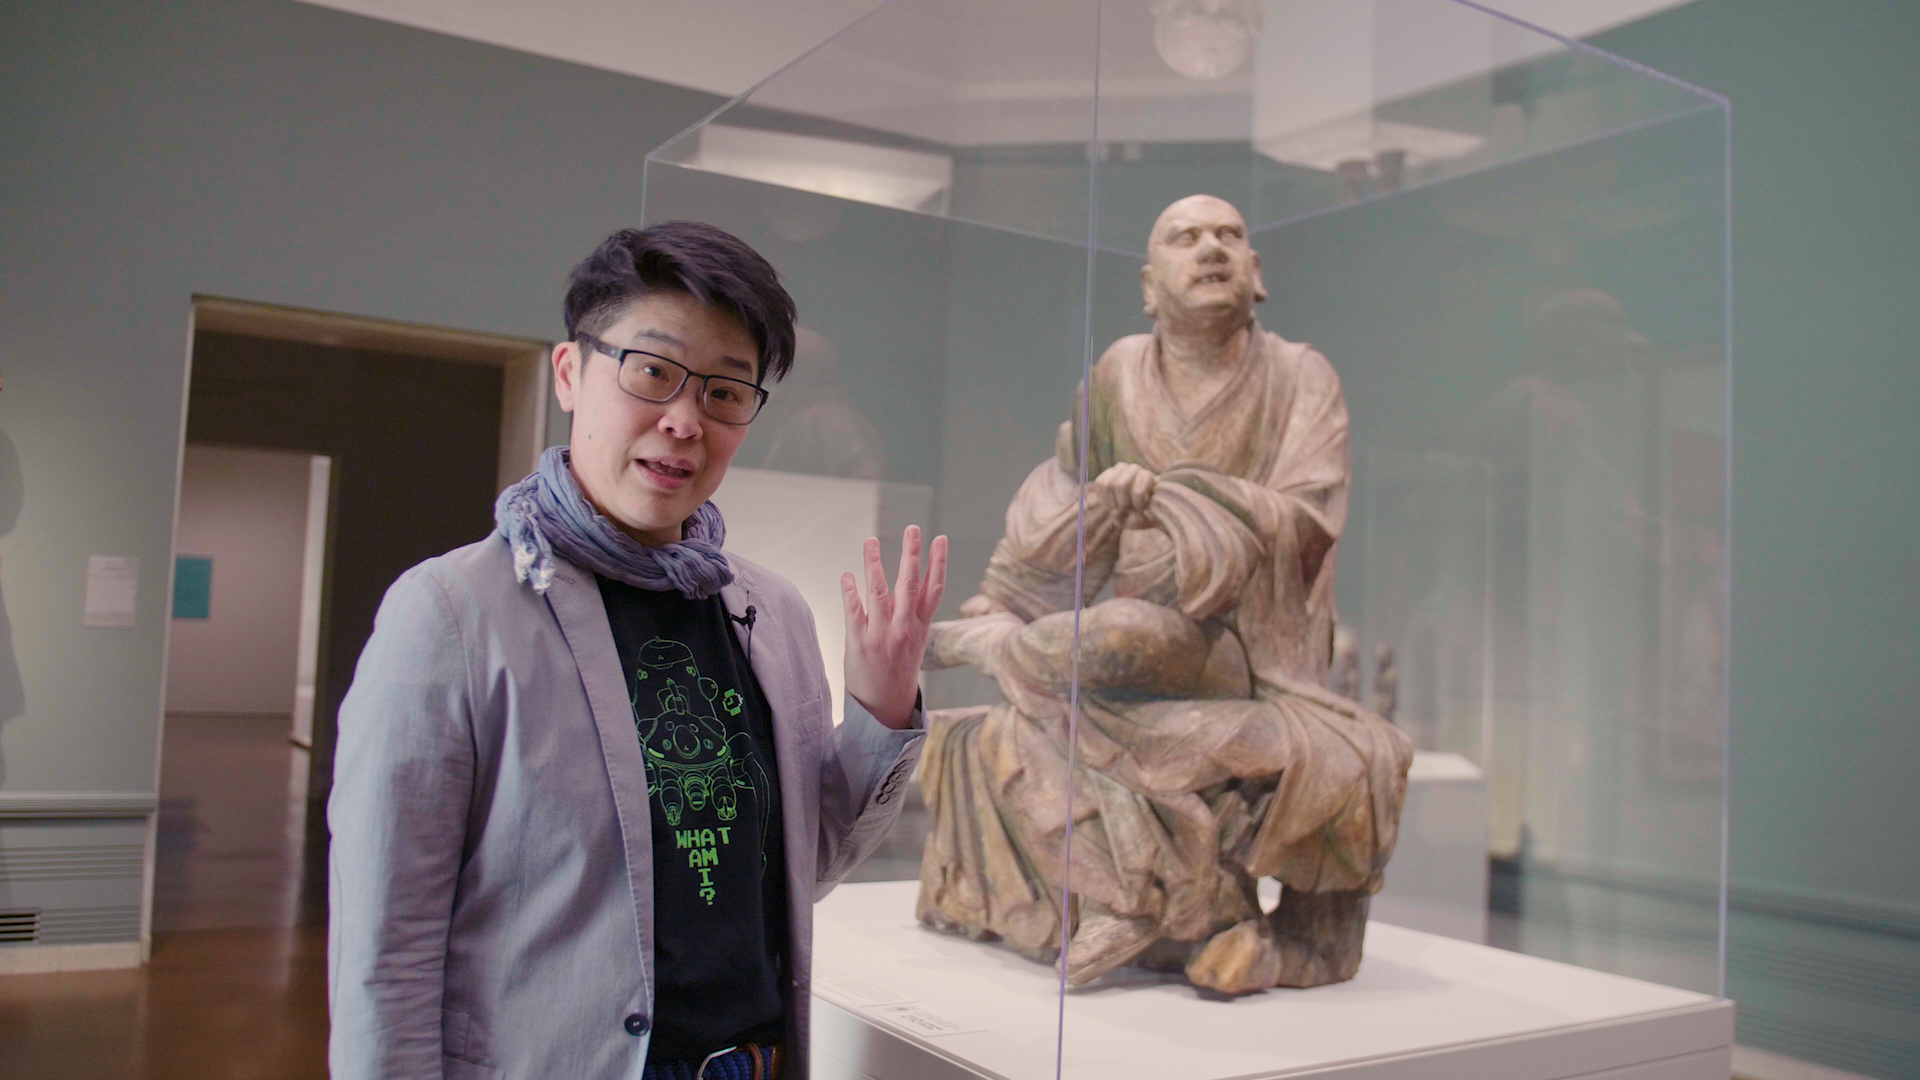 An art curator gestures to a large wooden Luohan sculpture behind her.